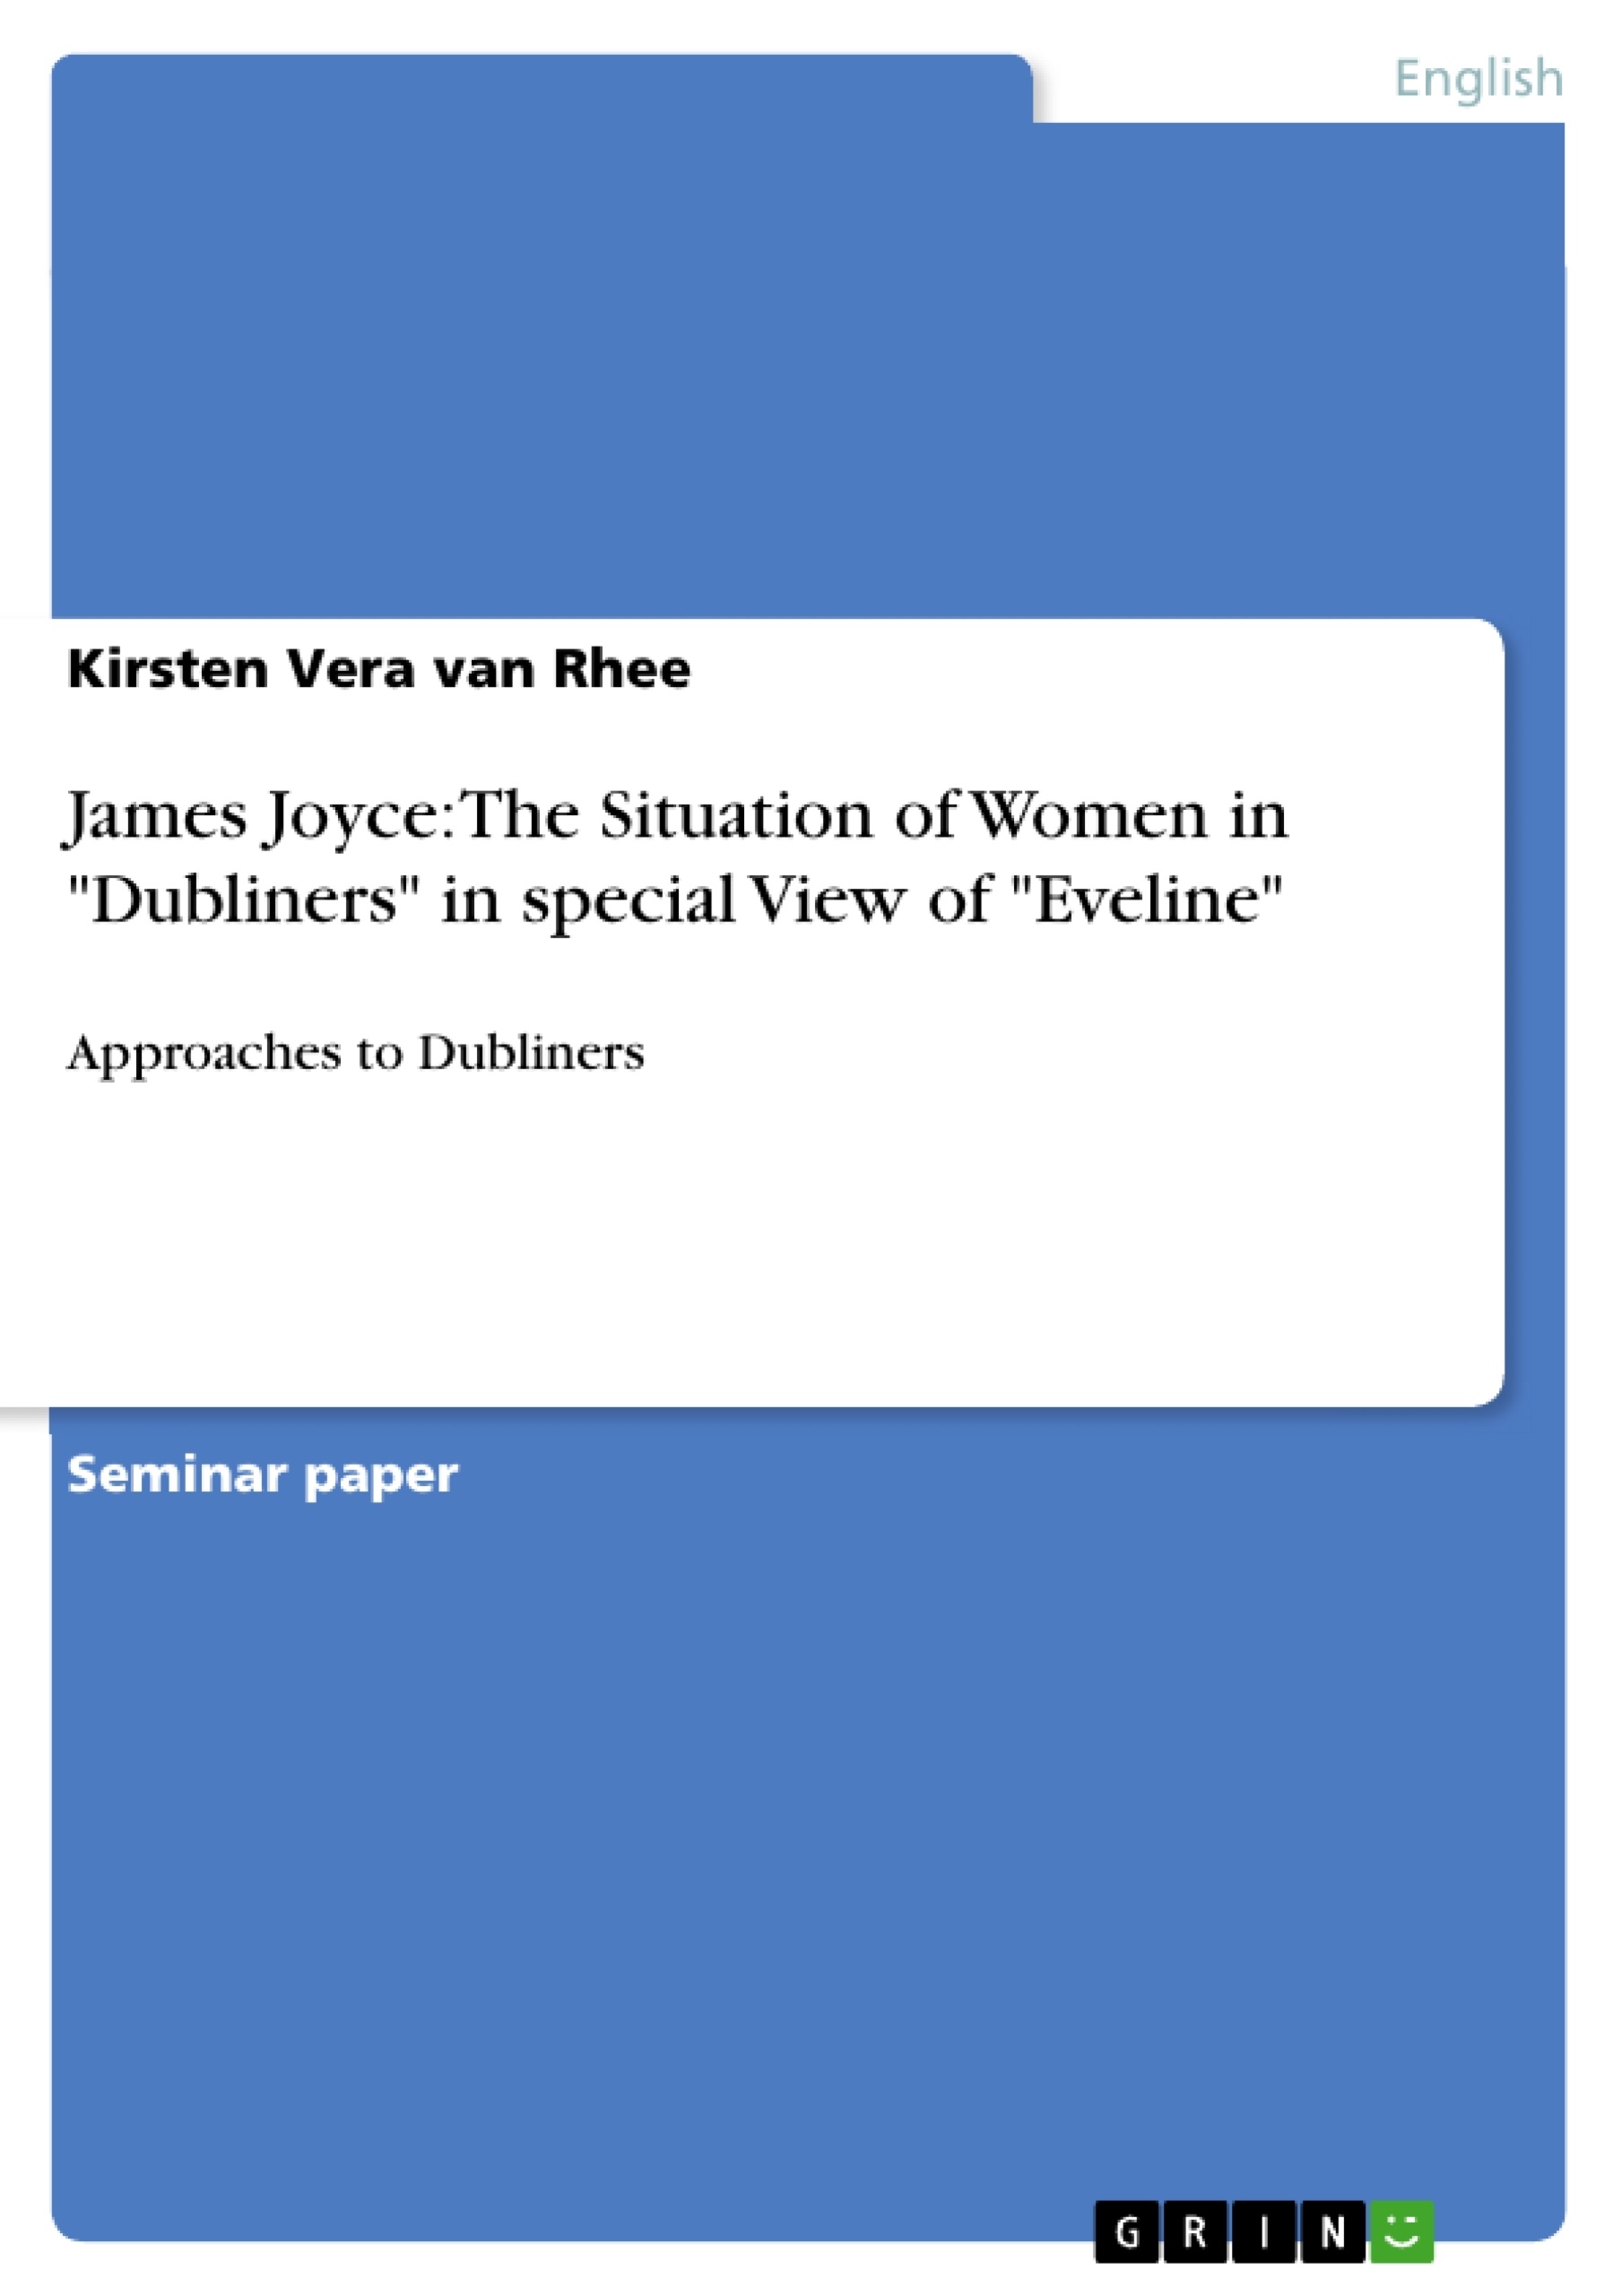 Título: James Joyce: The Situation of Women in "Dubliners" in special View of "Eveline"